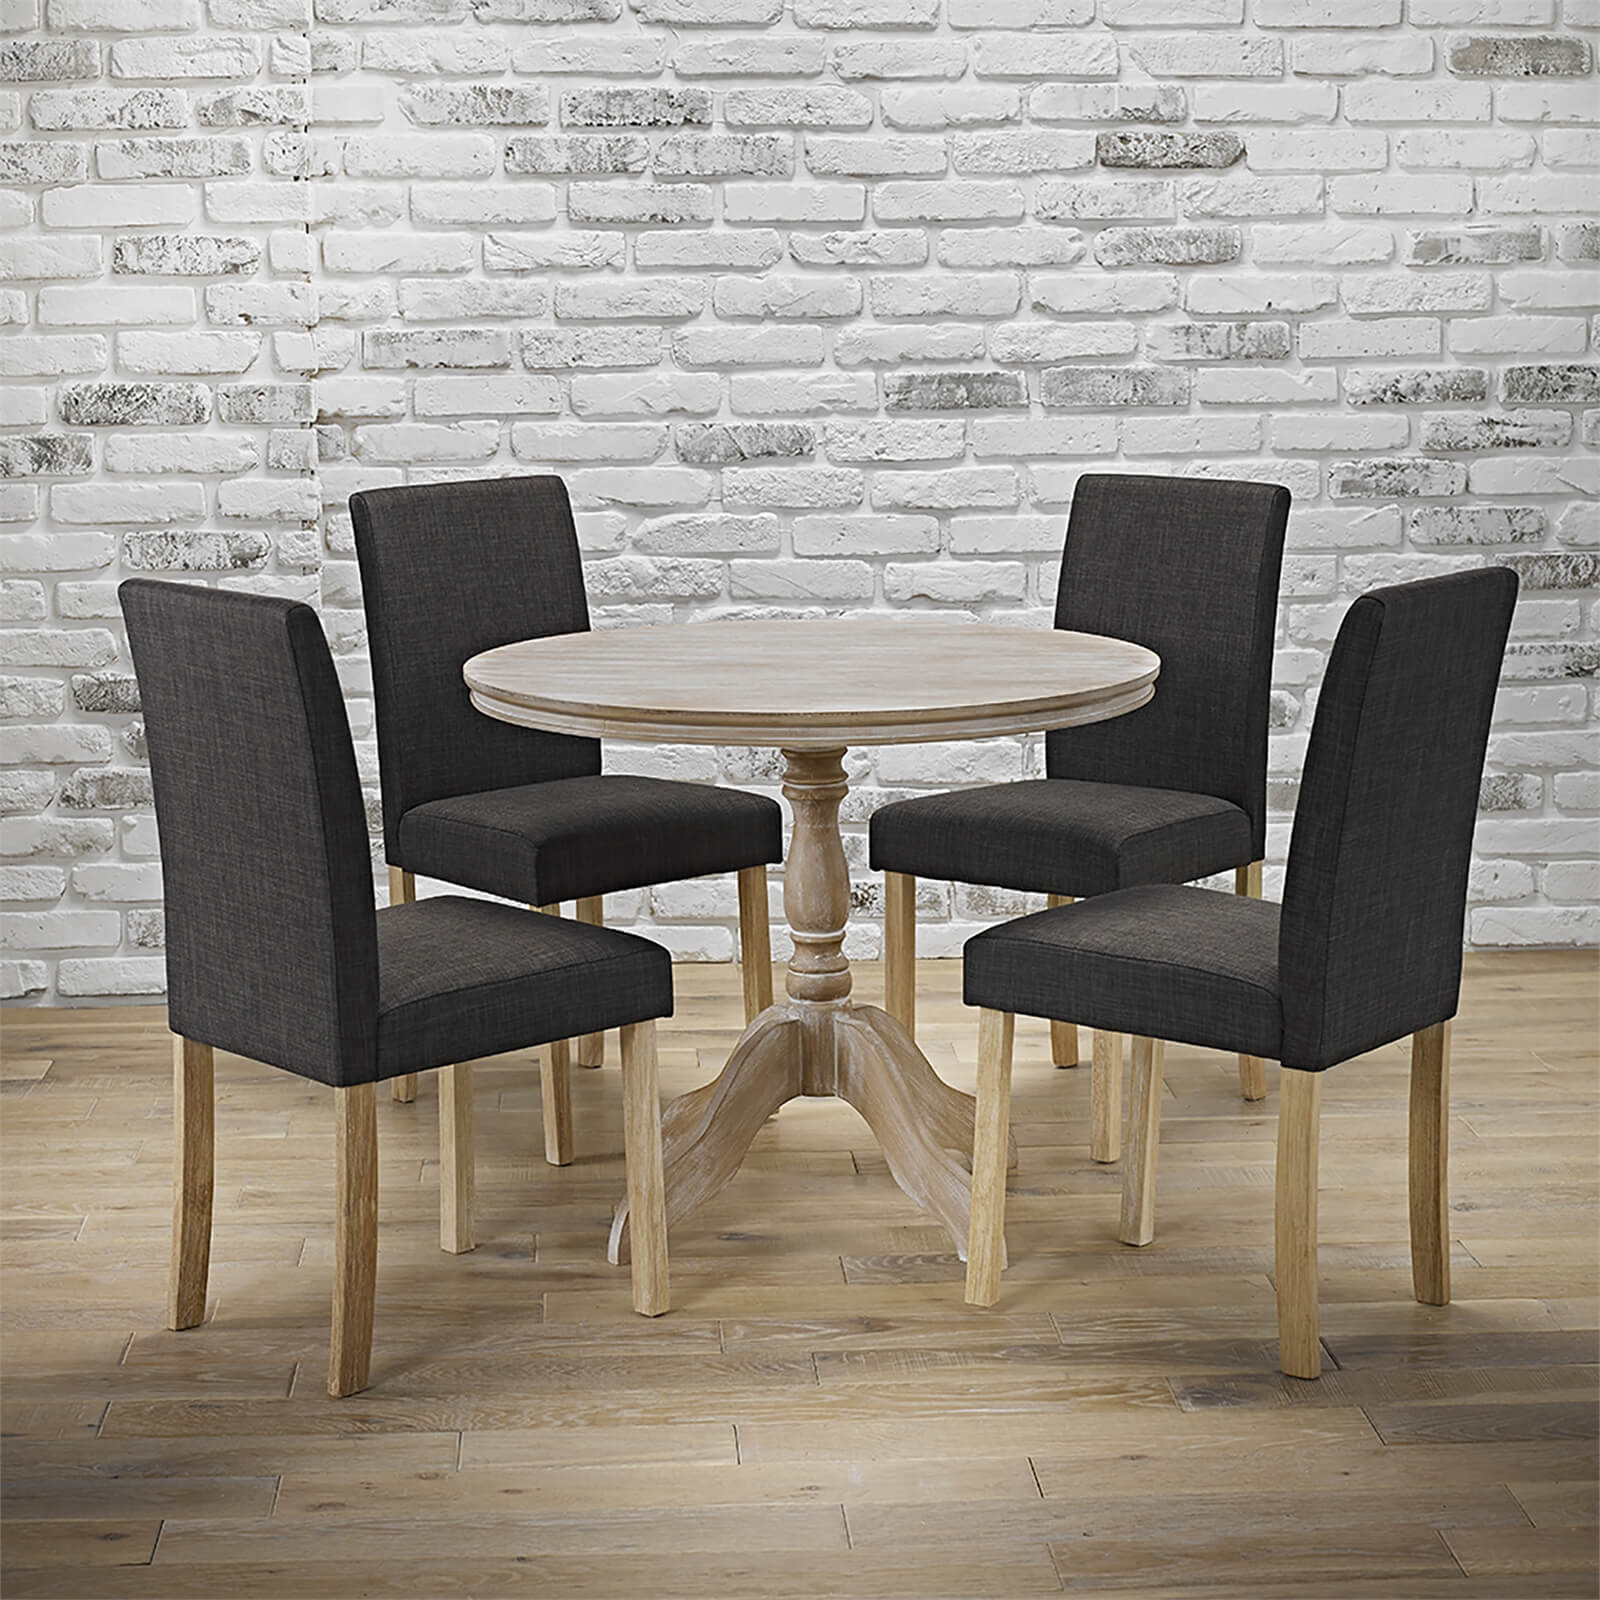 Provence 4 Seater Dining Set - Melodie Dining Chairs - Charcoal